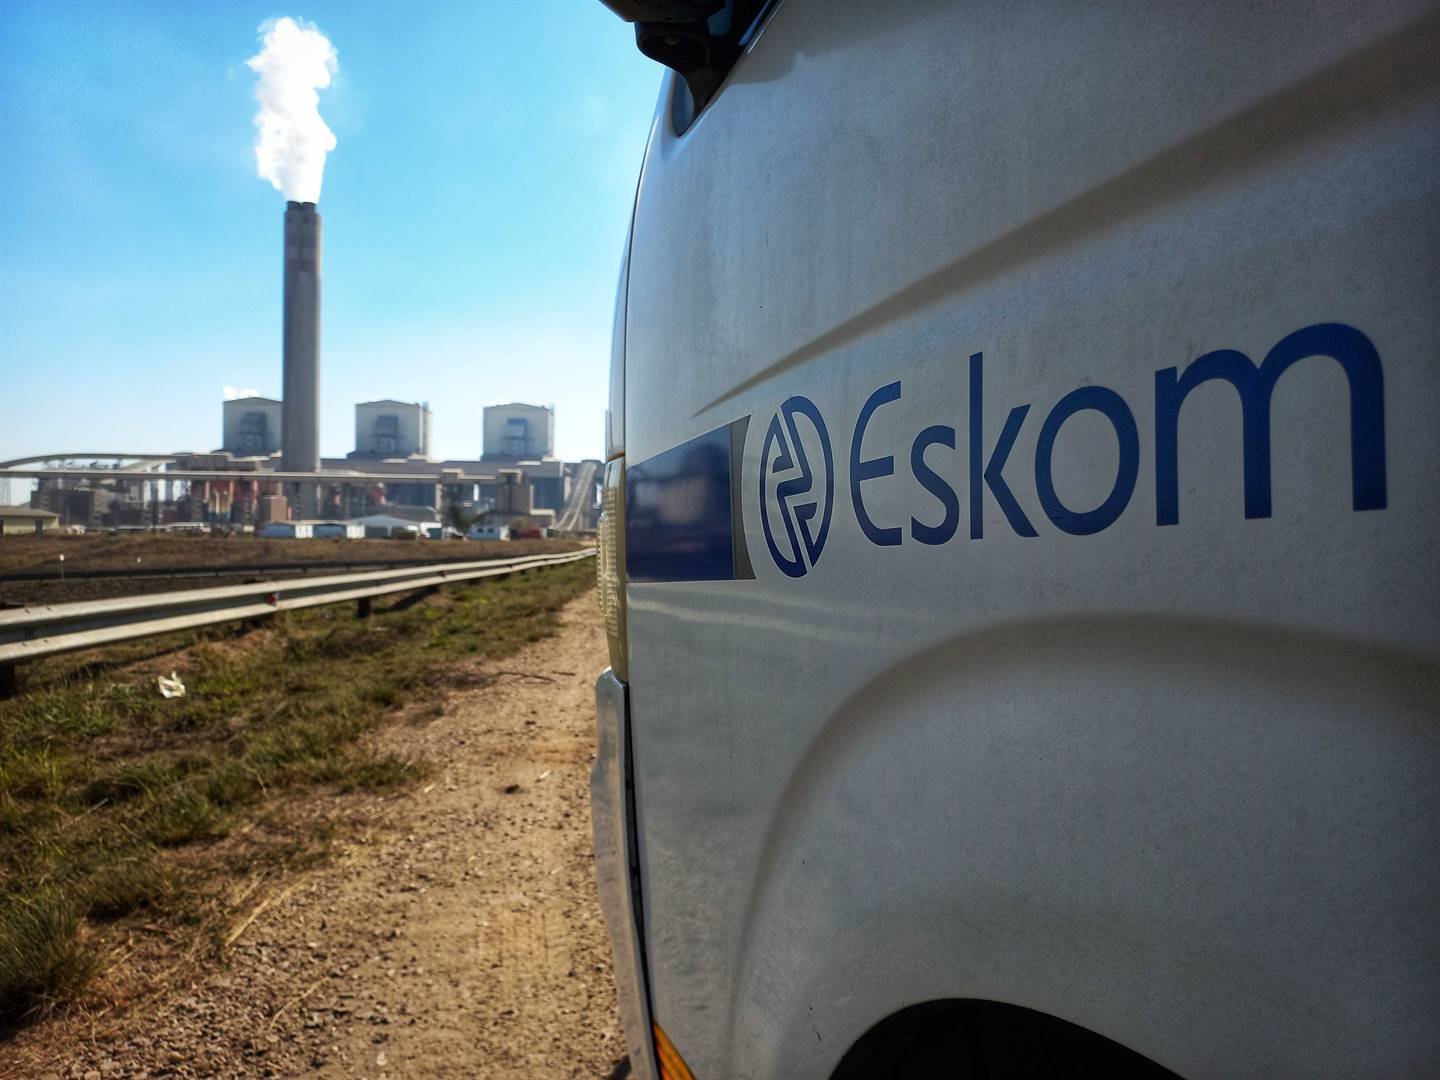 A truck driver was arrested for allegedly selling heavy fuel oil meant for Eskom to a private facility 